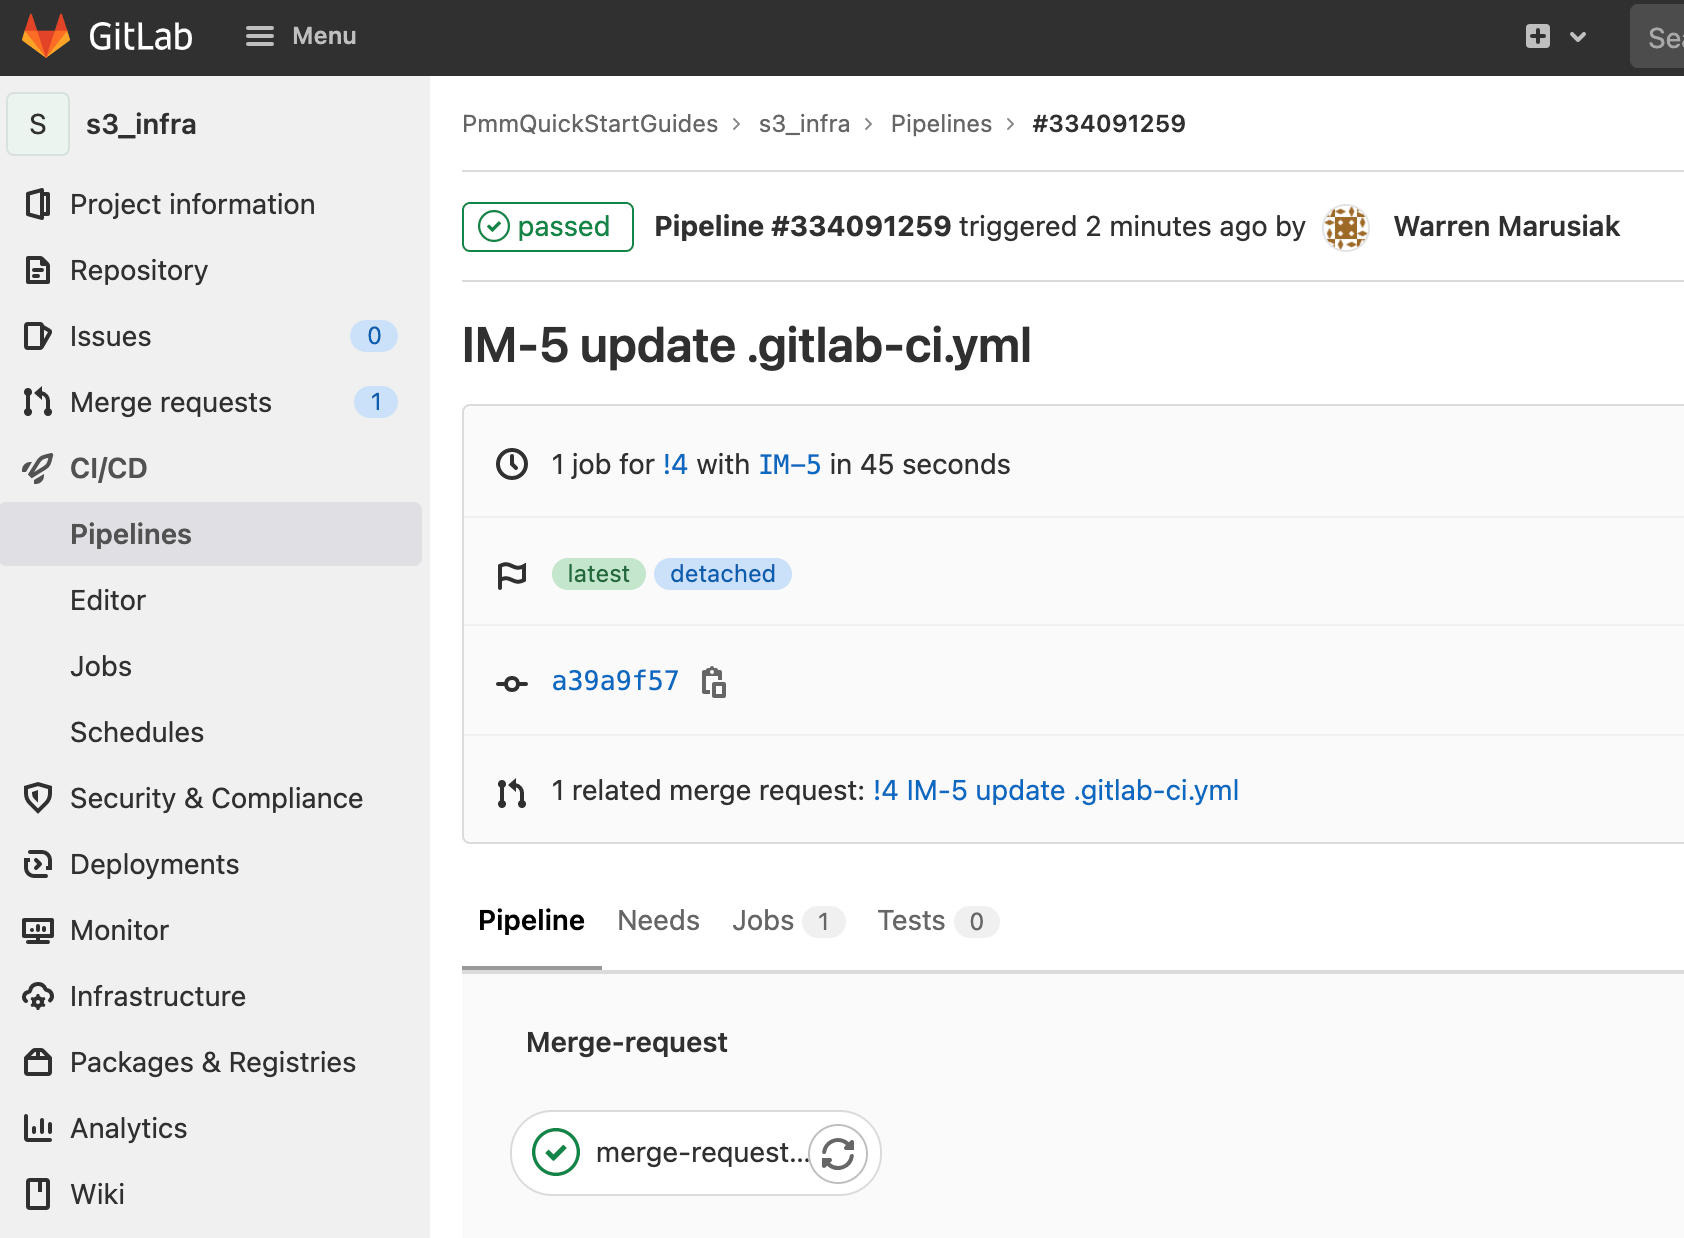 "Pipeline" detailed page showing that only merge-request-pipeline-job ran in GitLab